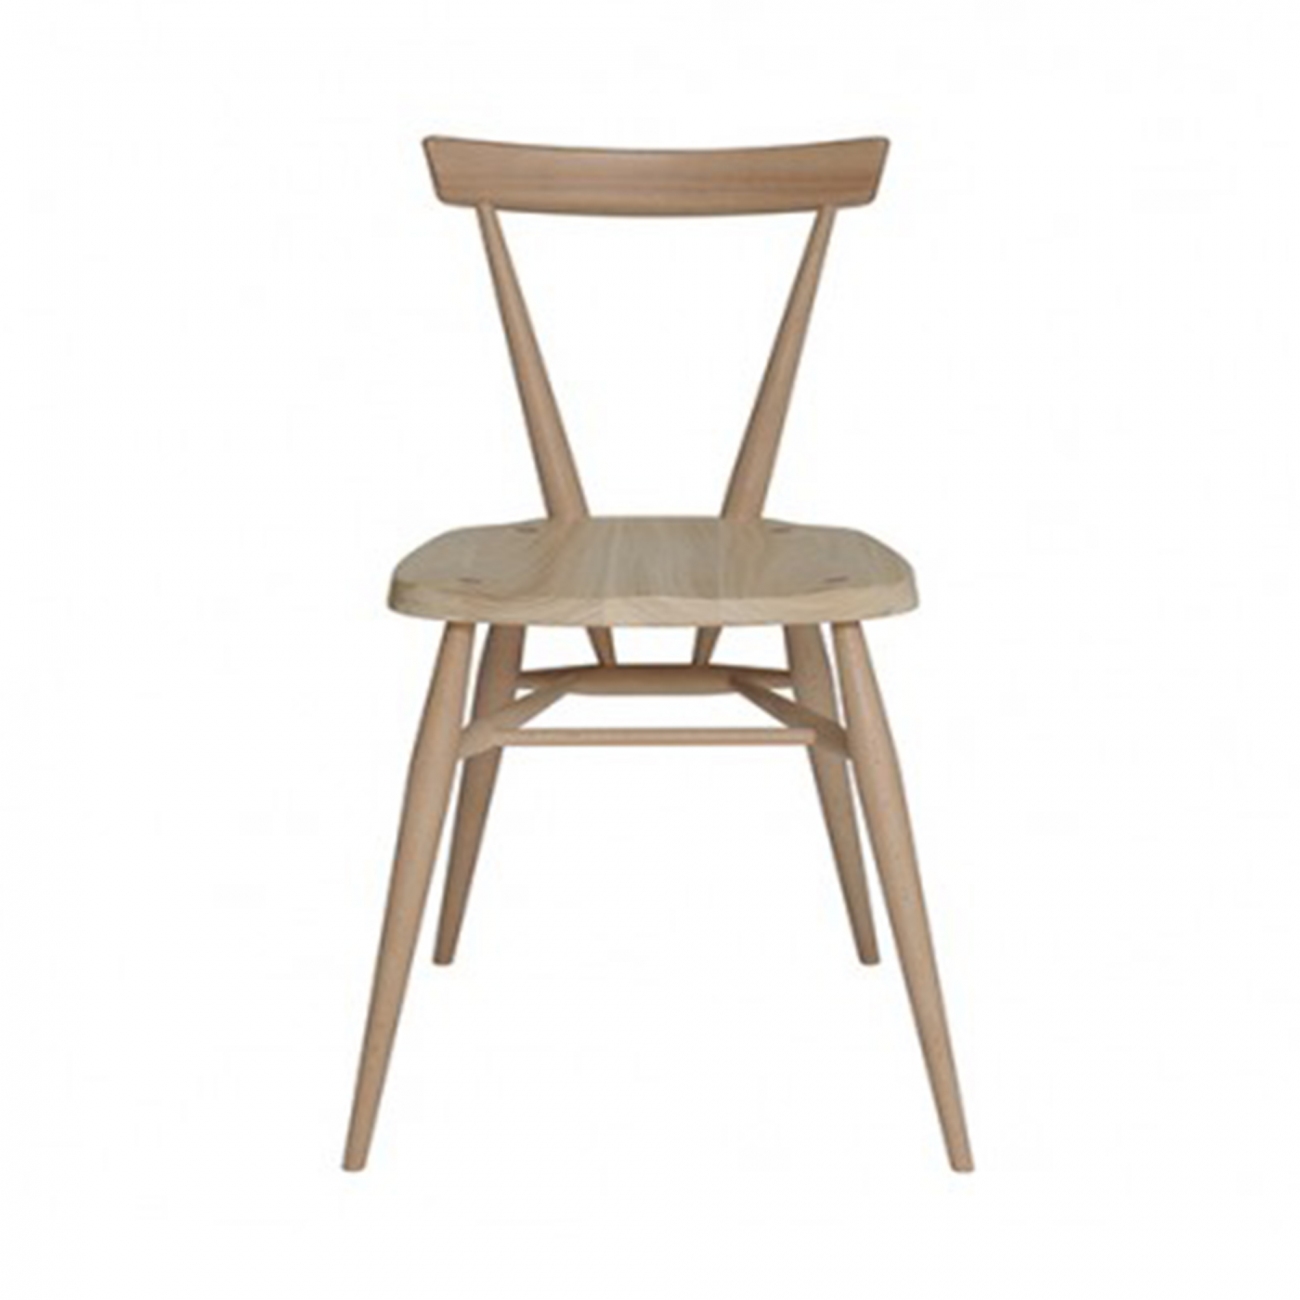 Ercol Chairmakers Stacking Chair